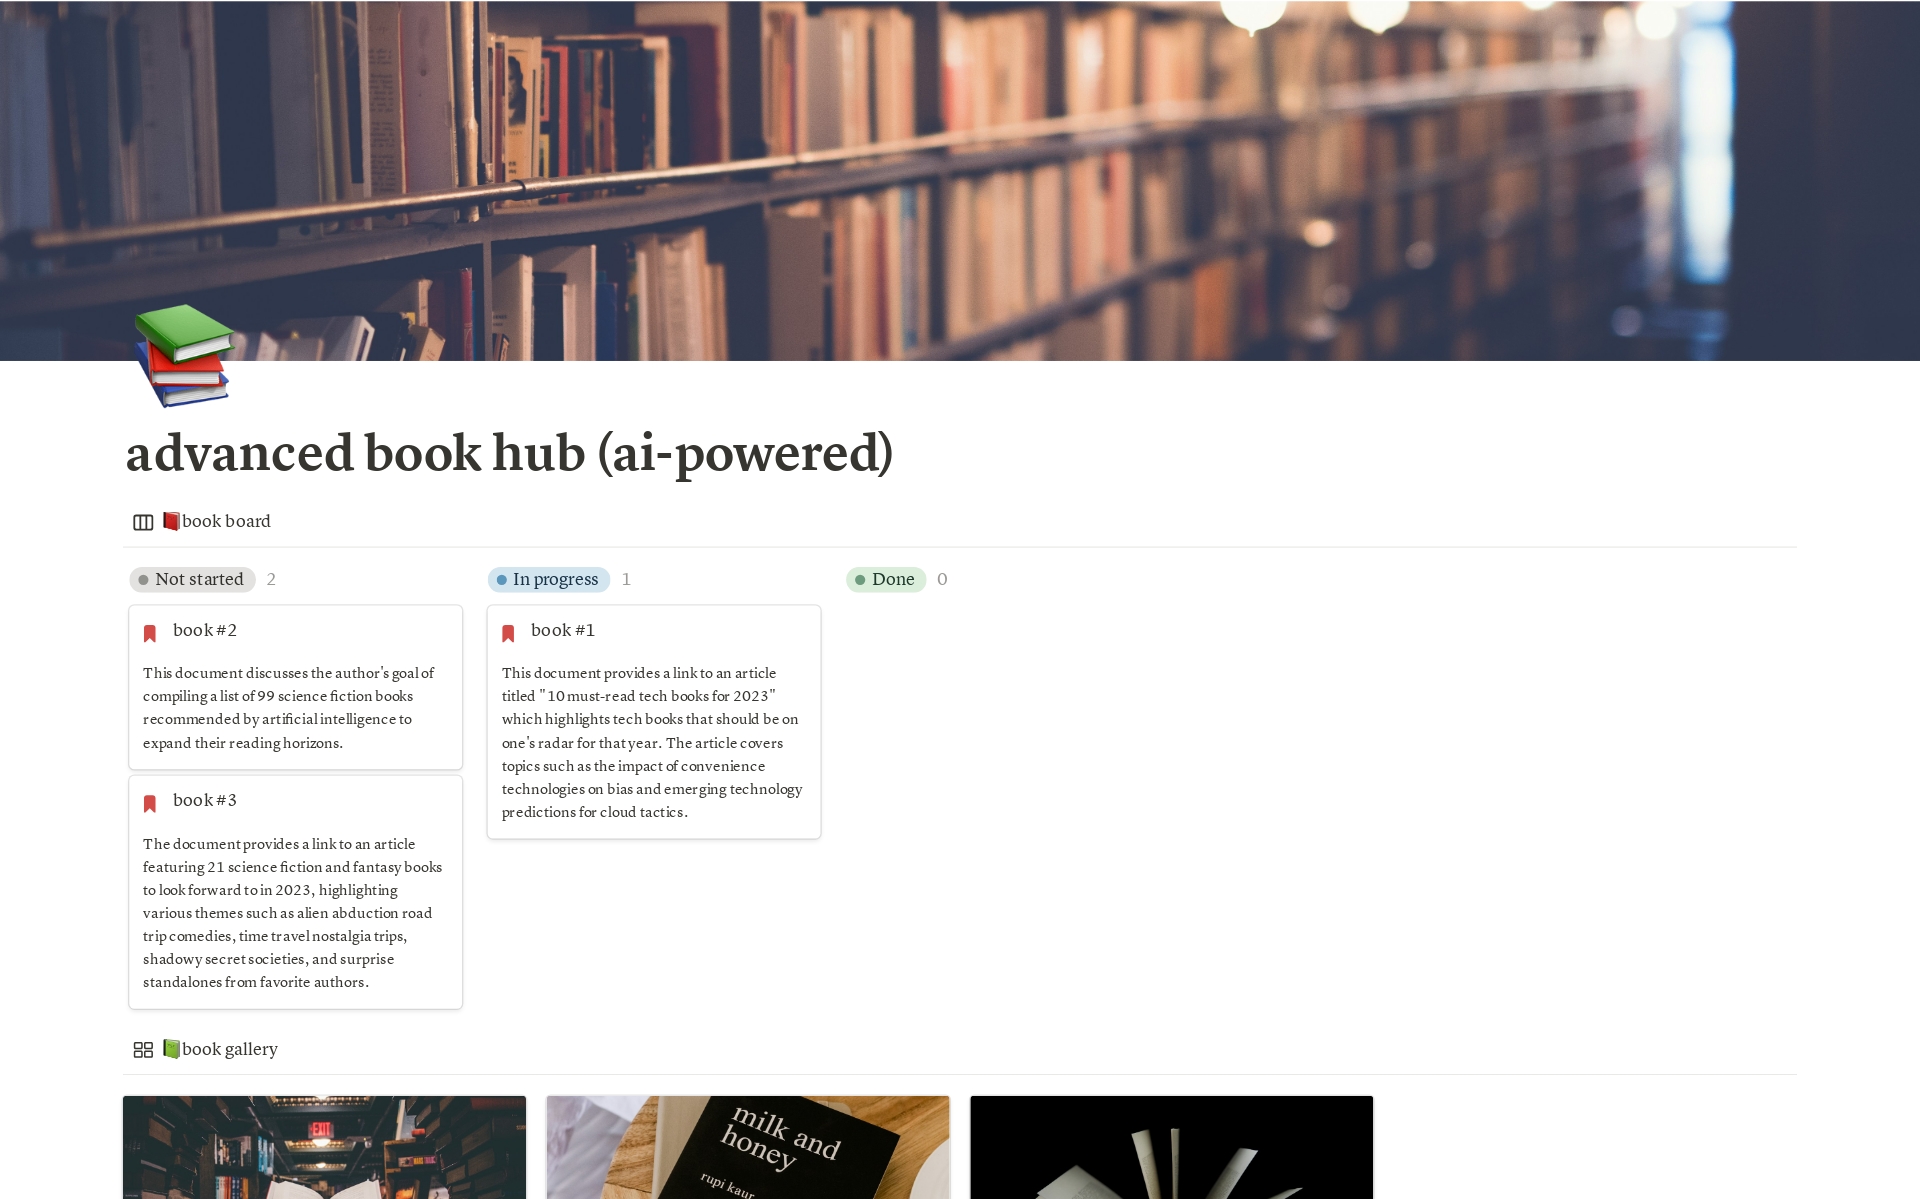 Explore the Advanced Book Hub, an AI-powered solution to manage your reading list! This easy-to-use platform comes with databases to track your favorite books, authors, and reading progress.